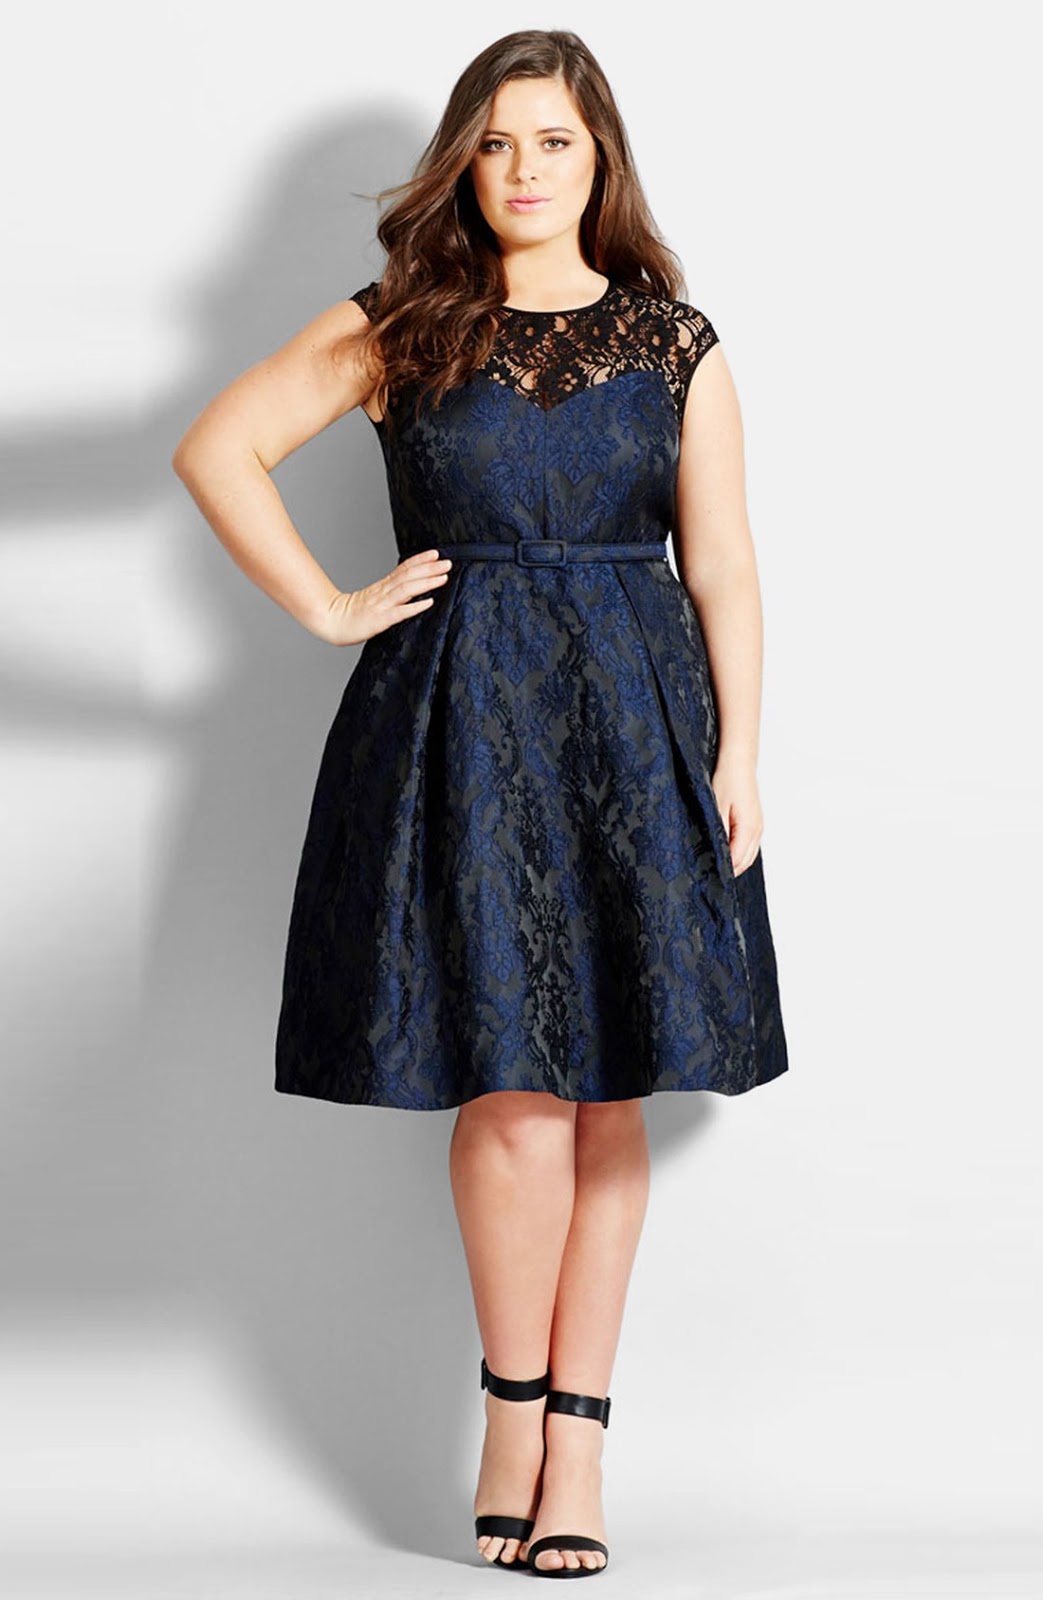 Plus-size Dress for Guest - All About Wedding